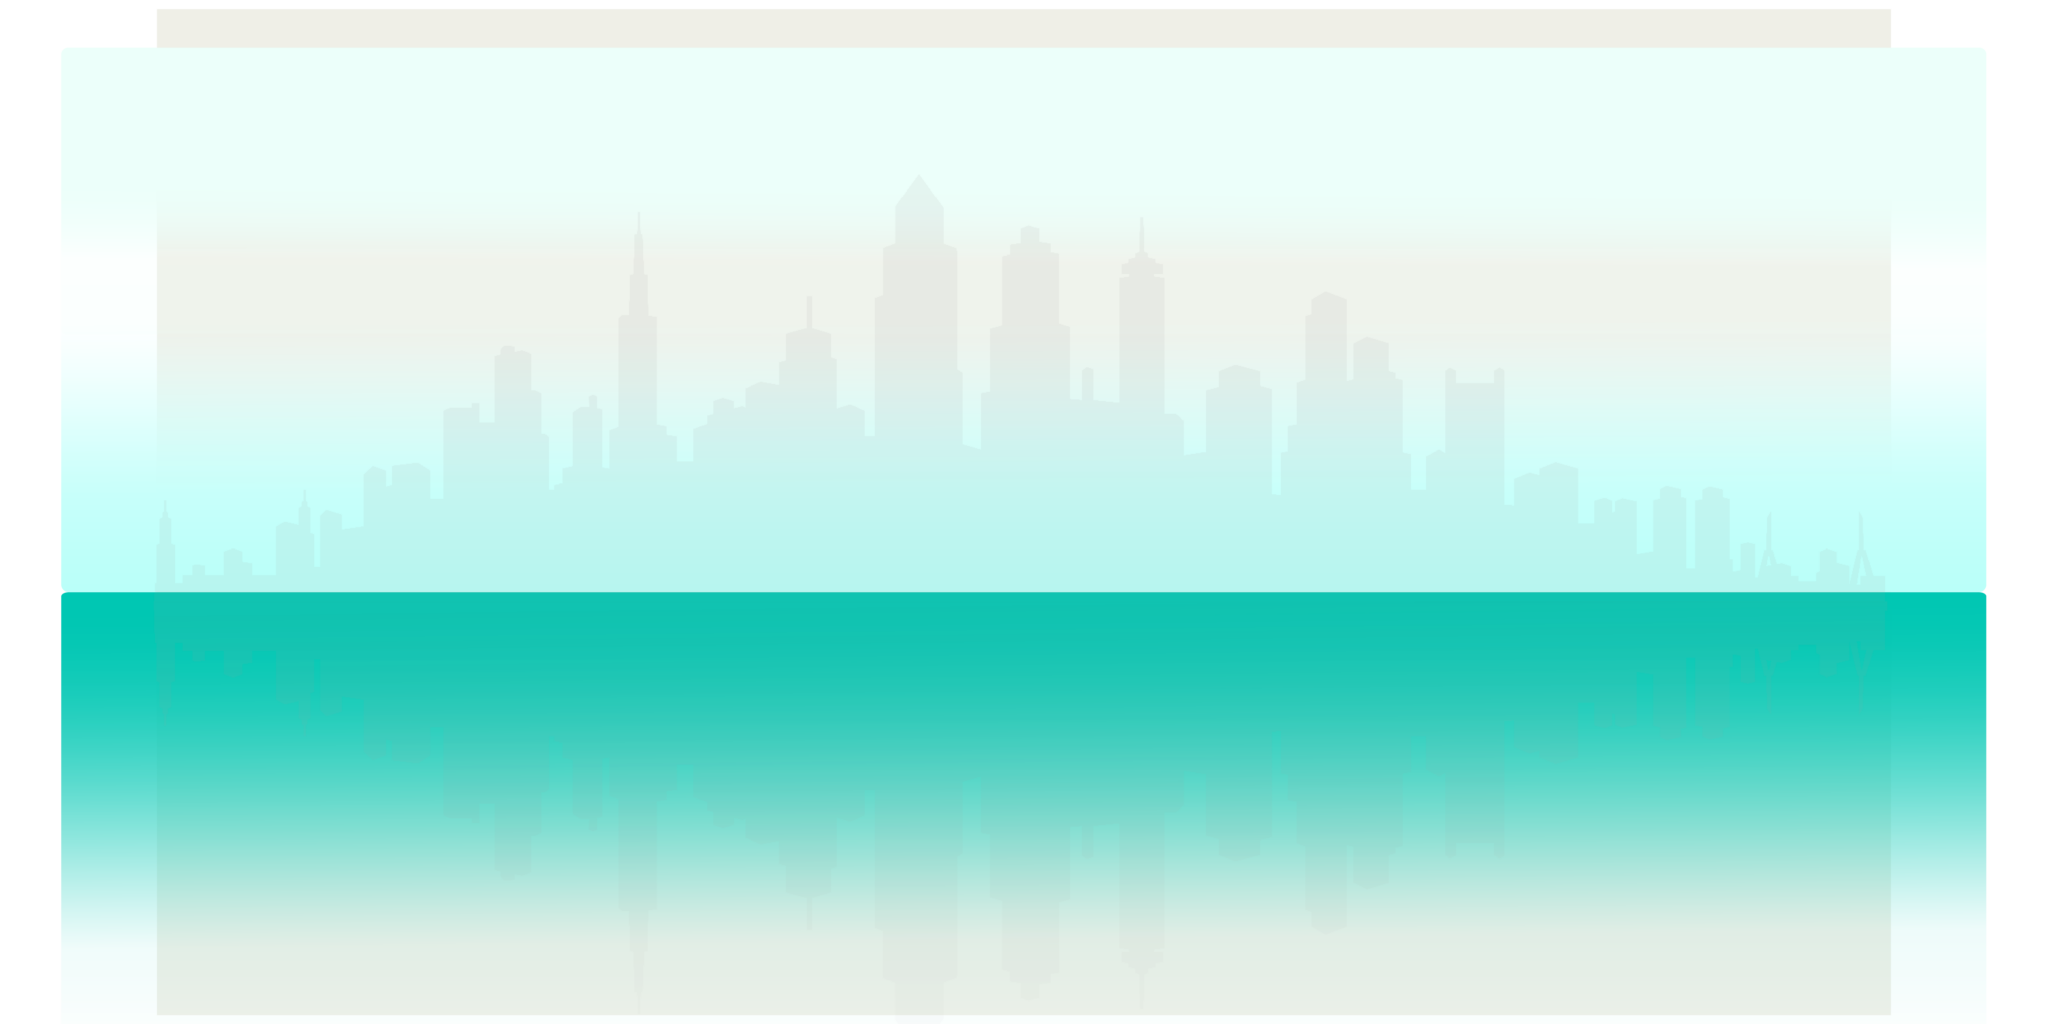 Decorative illustration. Image is horizontal with phased out grey city buildings, with sea green and teal underneath the buildings.